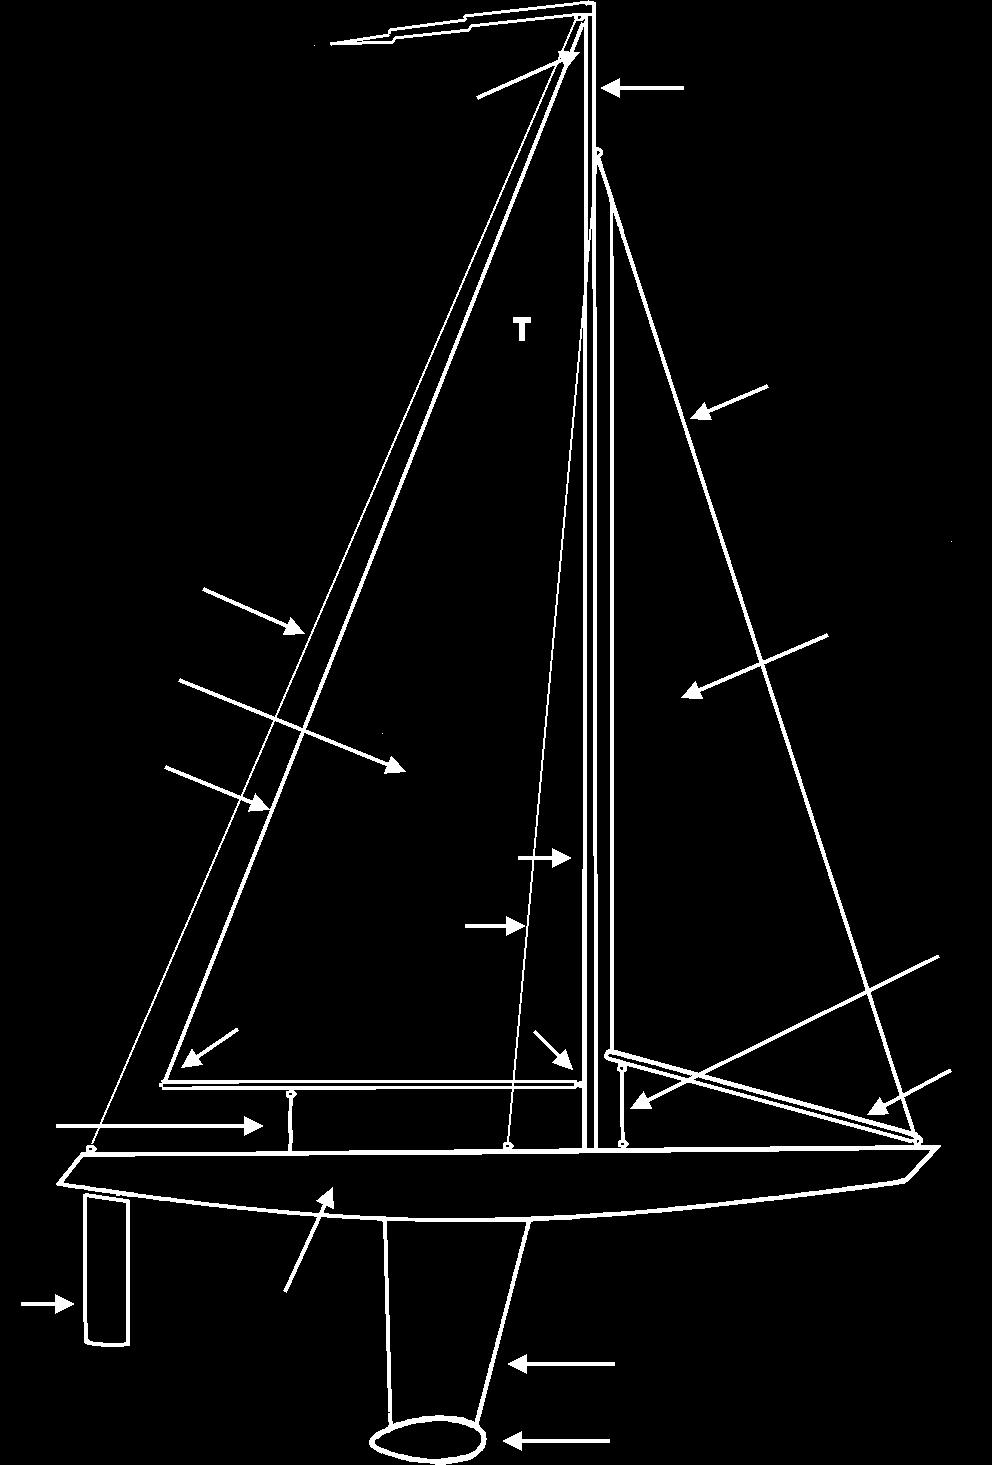 SAILING TIPS T27 RC (cont.) Page 50 Sailing Terms AHOY: The usual way to greet another boat is to shout out Ahoy followed by the name of the other boat. BOW: The forward end of the boat.